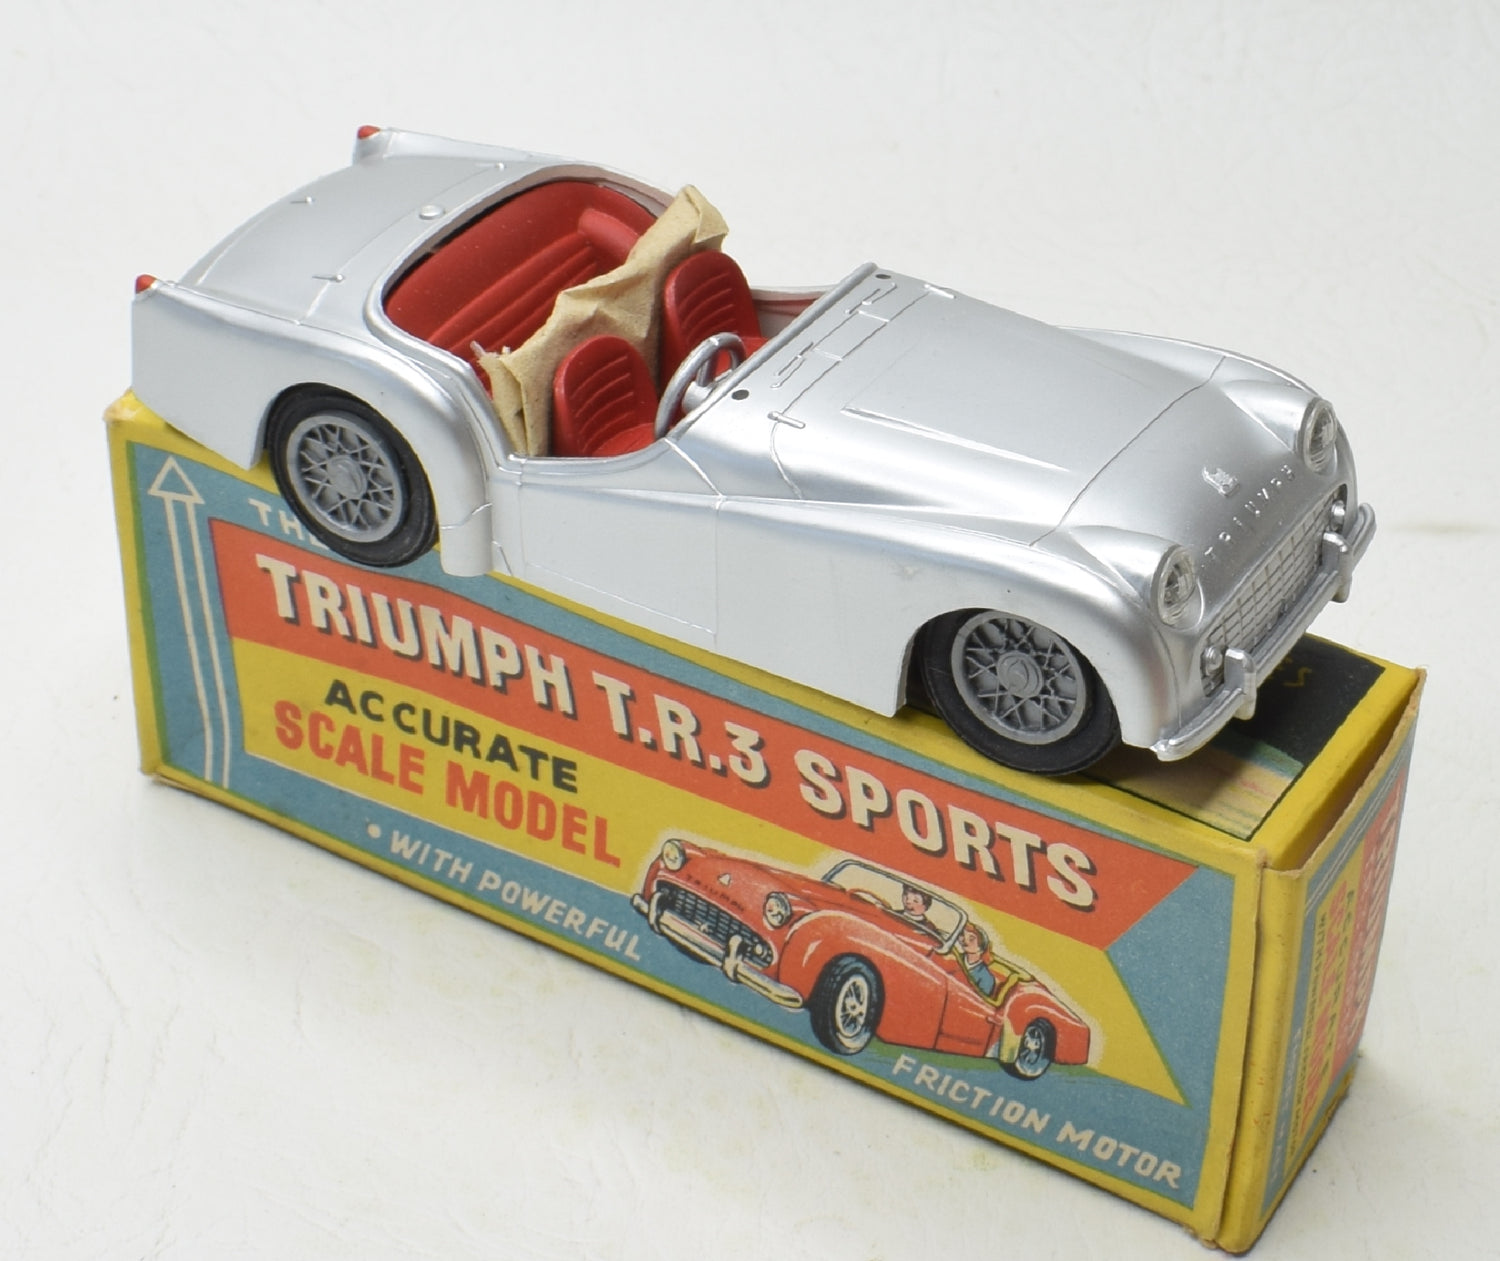 Clifford Series Tr3 Sports Virtually Mint/Boxed 'Geneva' Collection